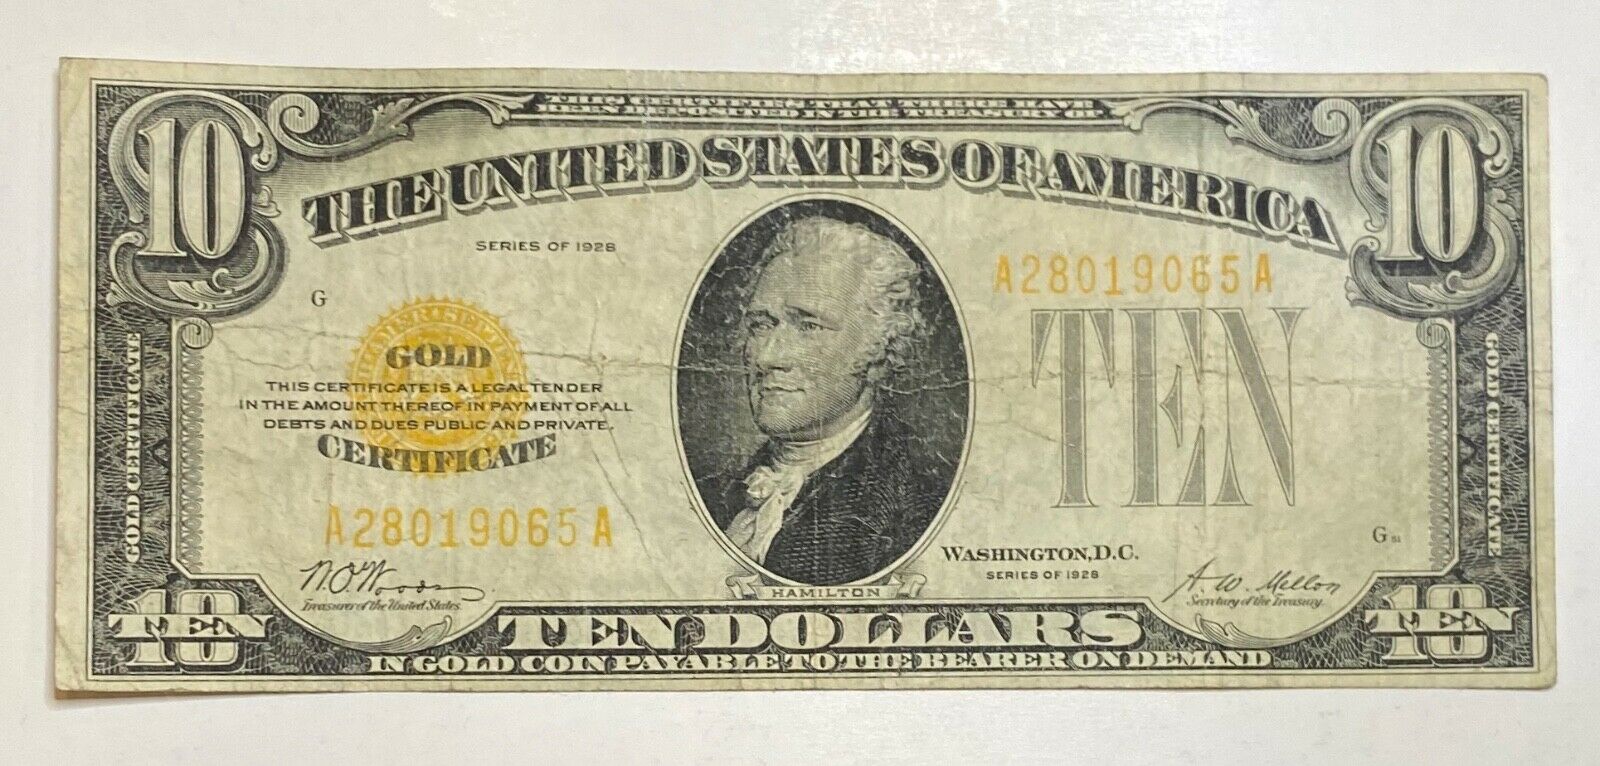 1928 Small $10 Gold Certificate Currency Note Serial #28019065